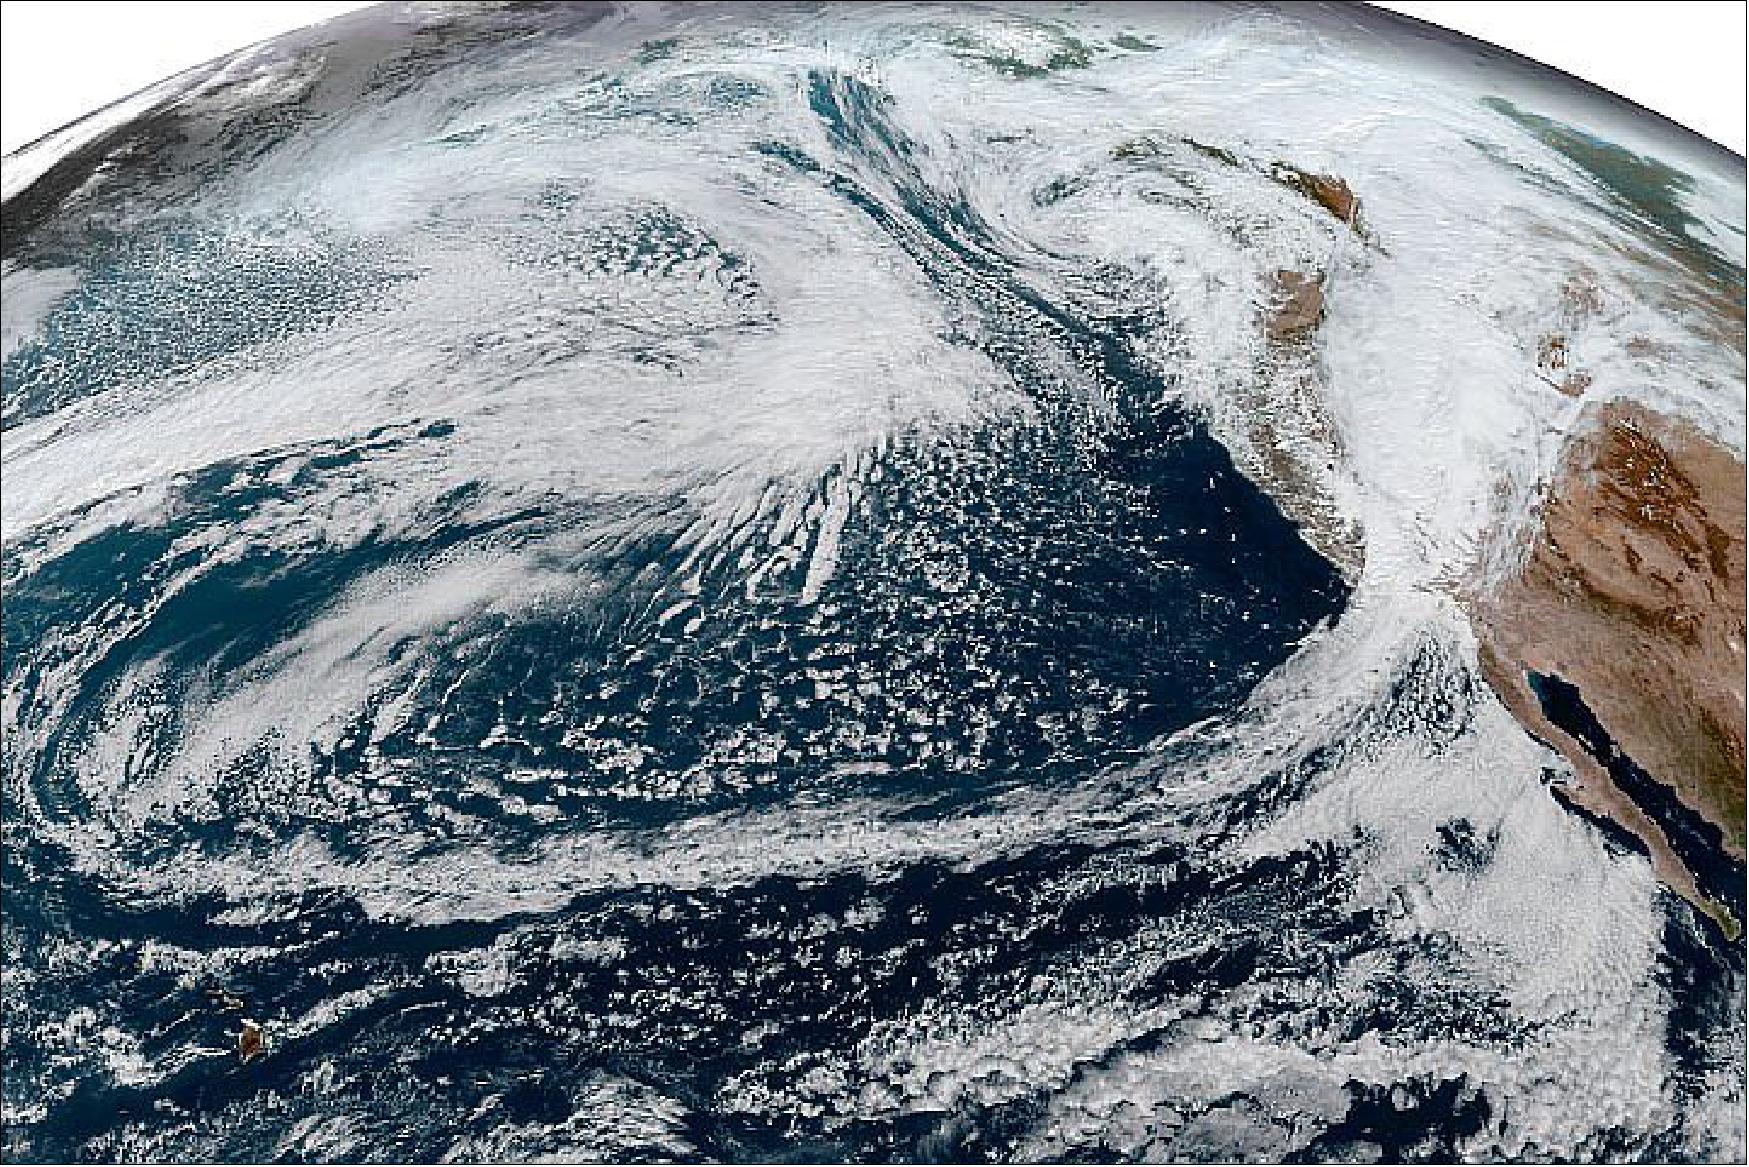 Figure 29: This simulated natural-color image, acquired on October 25 by NOAA’s Geostationary Operational Environmental Satellite 17 (GOES-17) shows an arc of clouds stretching across the Pacific—a visible manifestation of the atmospheric river pouring moisture into the Pacific Northwest. GOES-17 is operated by the National Oceanic and Atmospheric Administration (NOAA); NASA helps develop and launch the GOES series of satellites (image credit: NASA Earth Observatory)